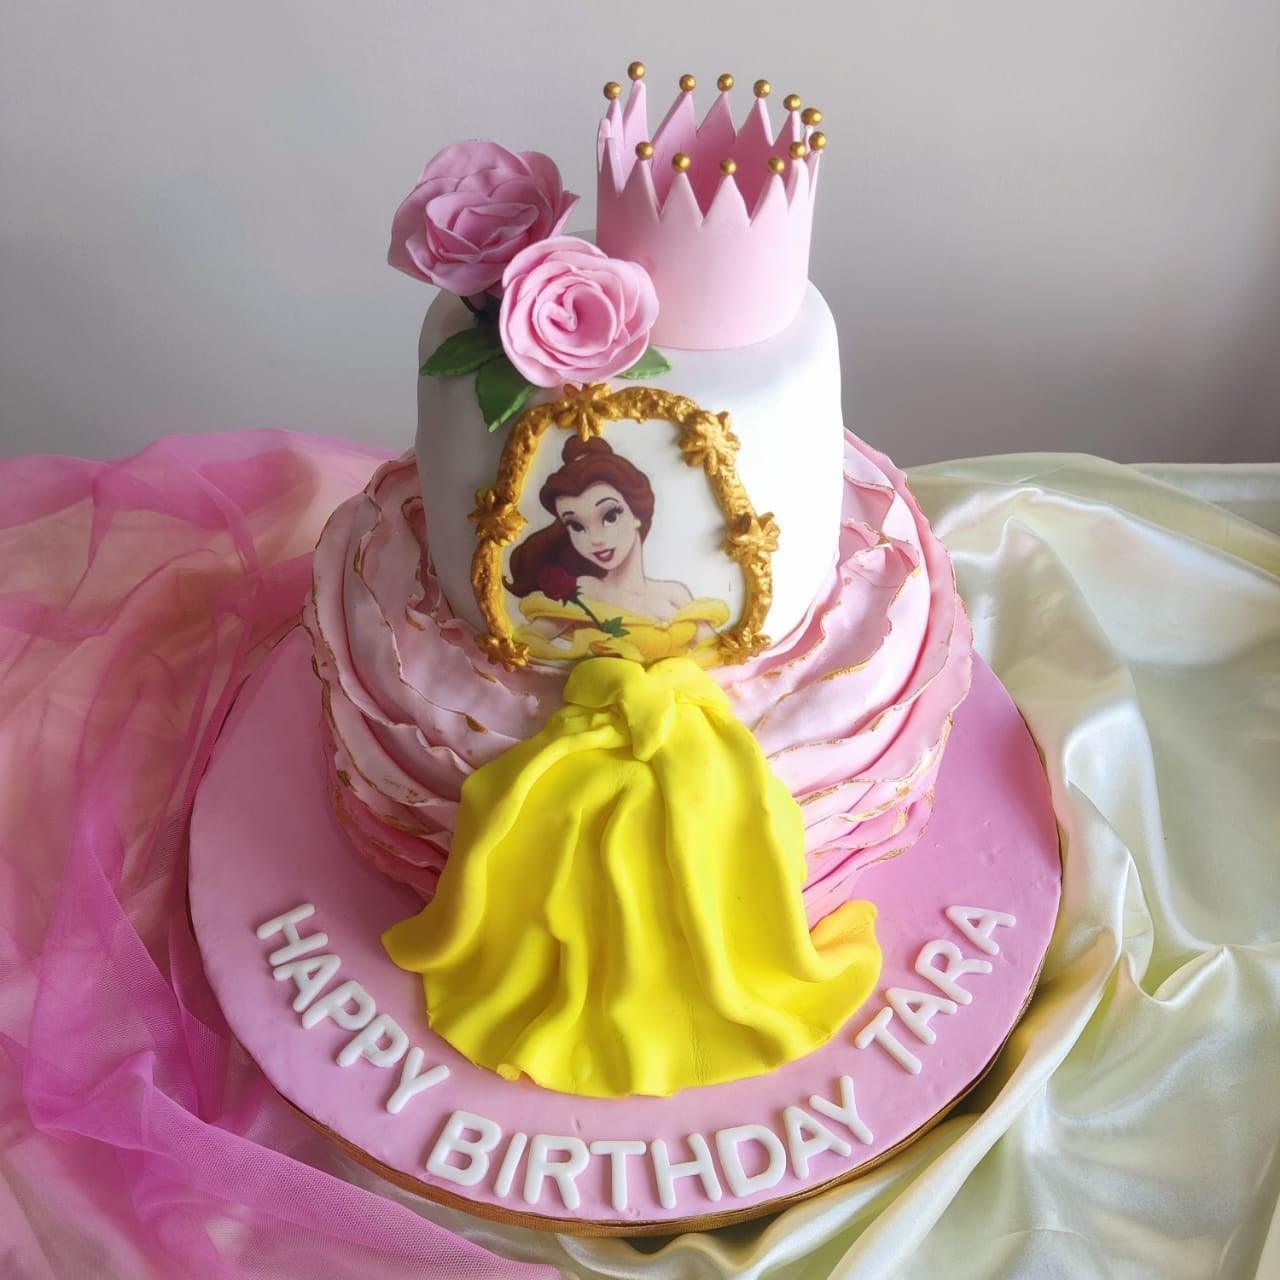 Full 4k Collection Of Amazing Princess Birthday Cake Images Over 999 